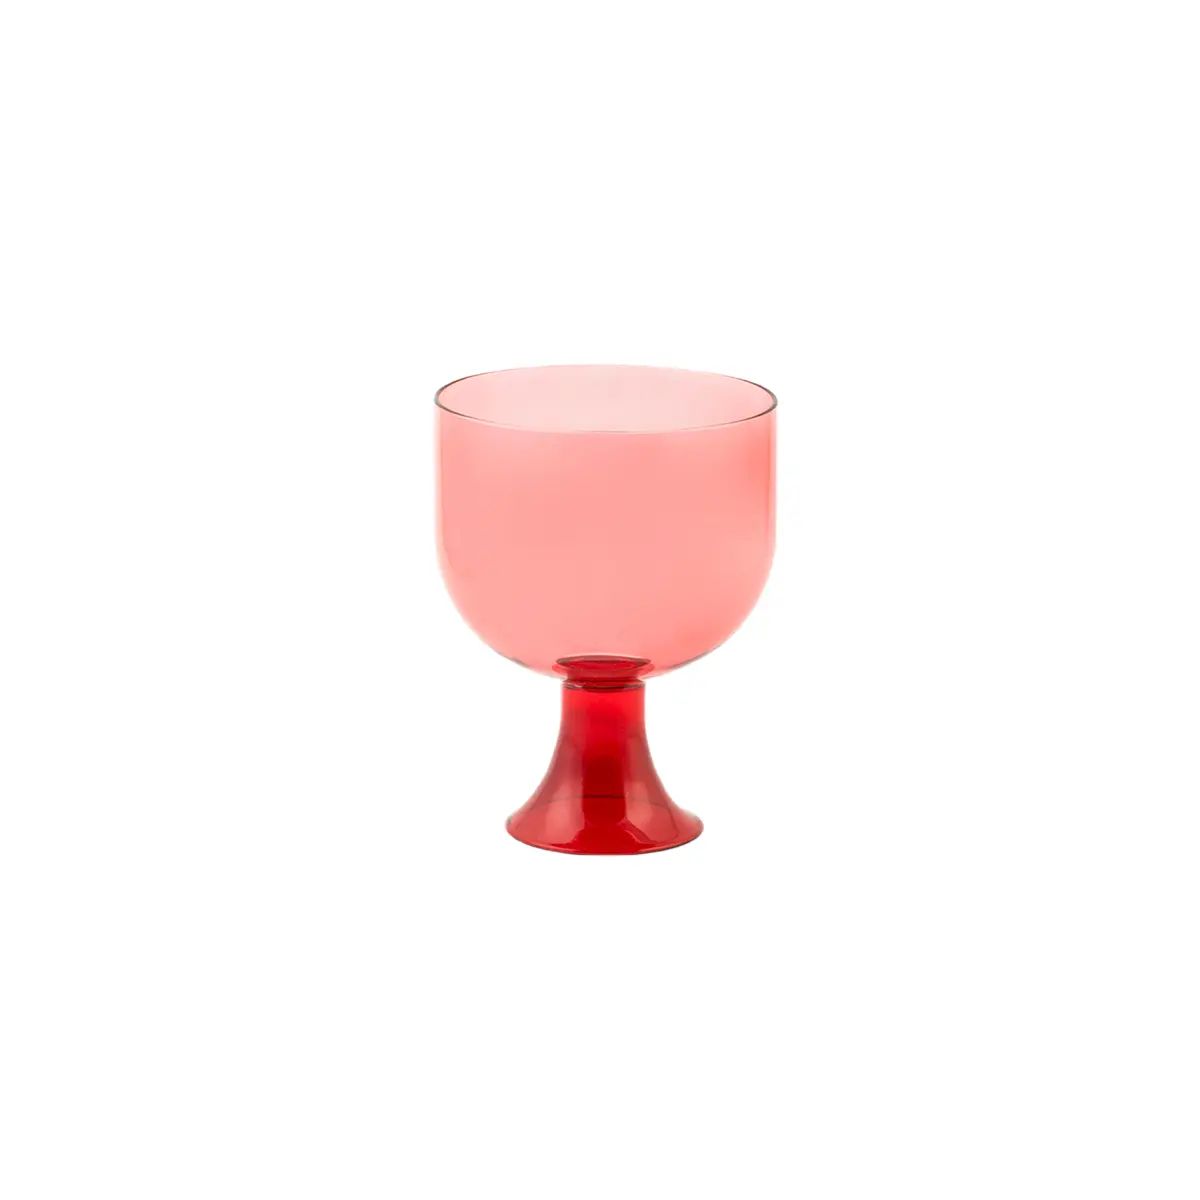 Medium Cuppino Blown Glass Cup in Red by Aldo Cibic for Paola C. | Chairish